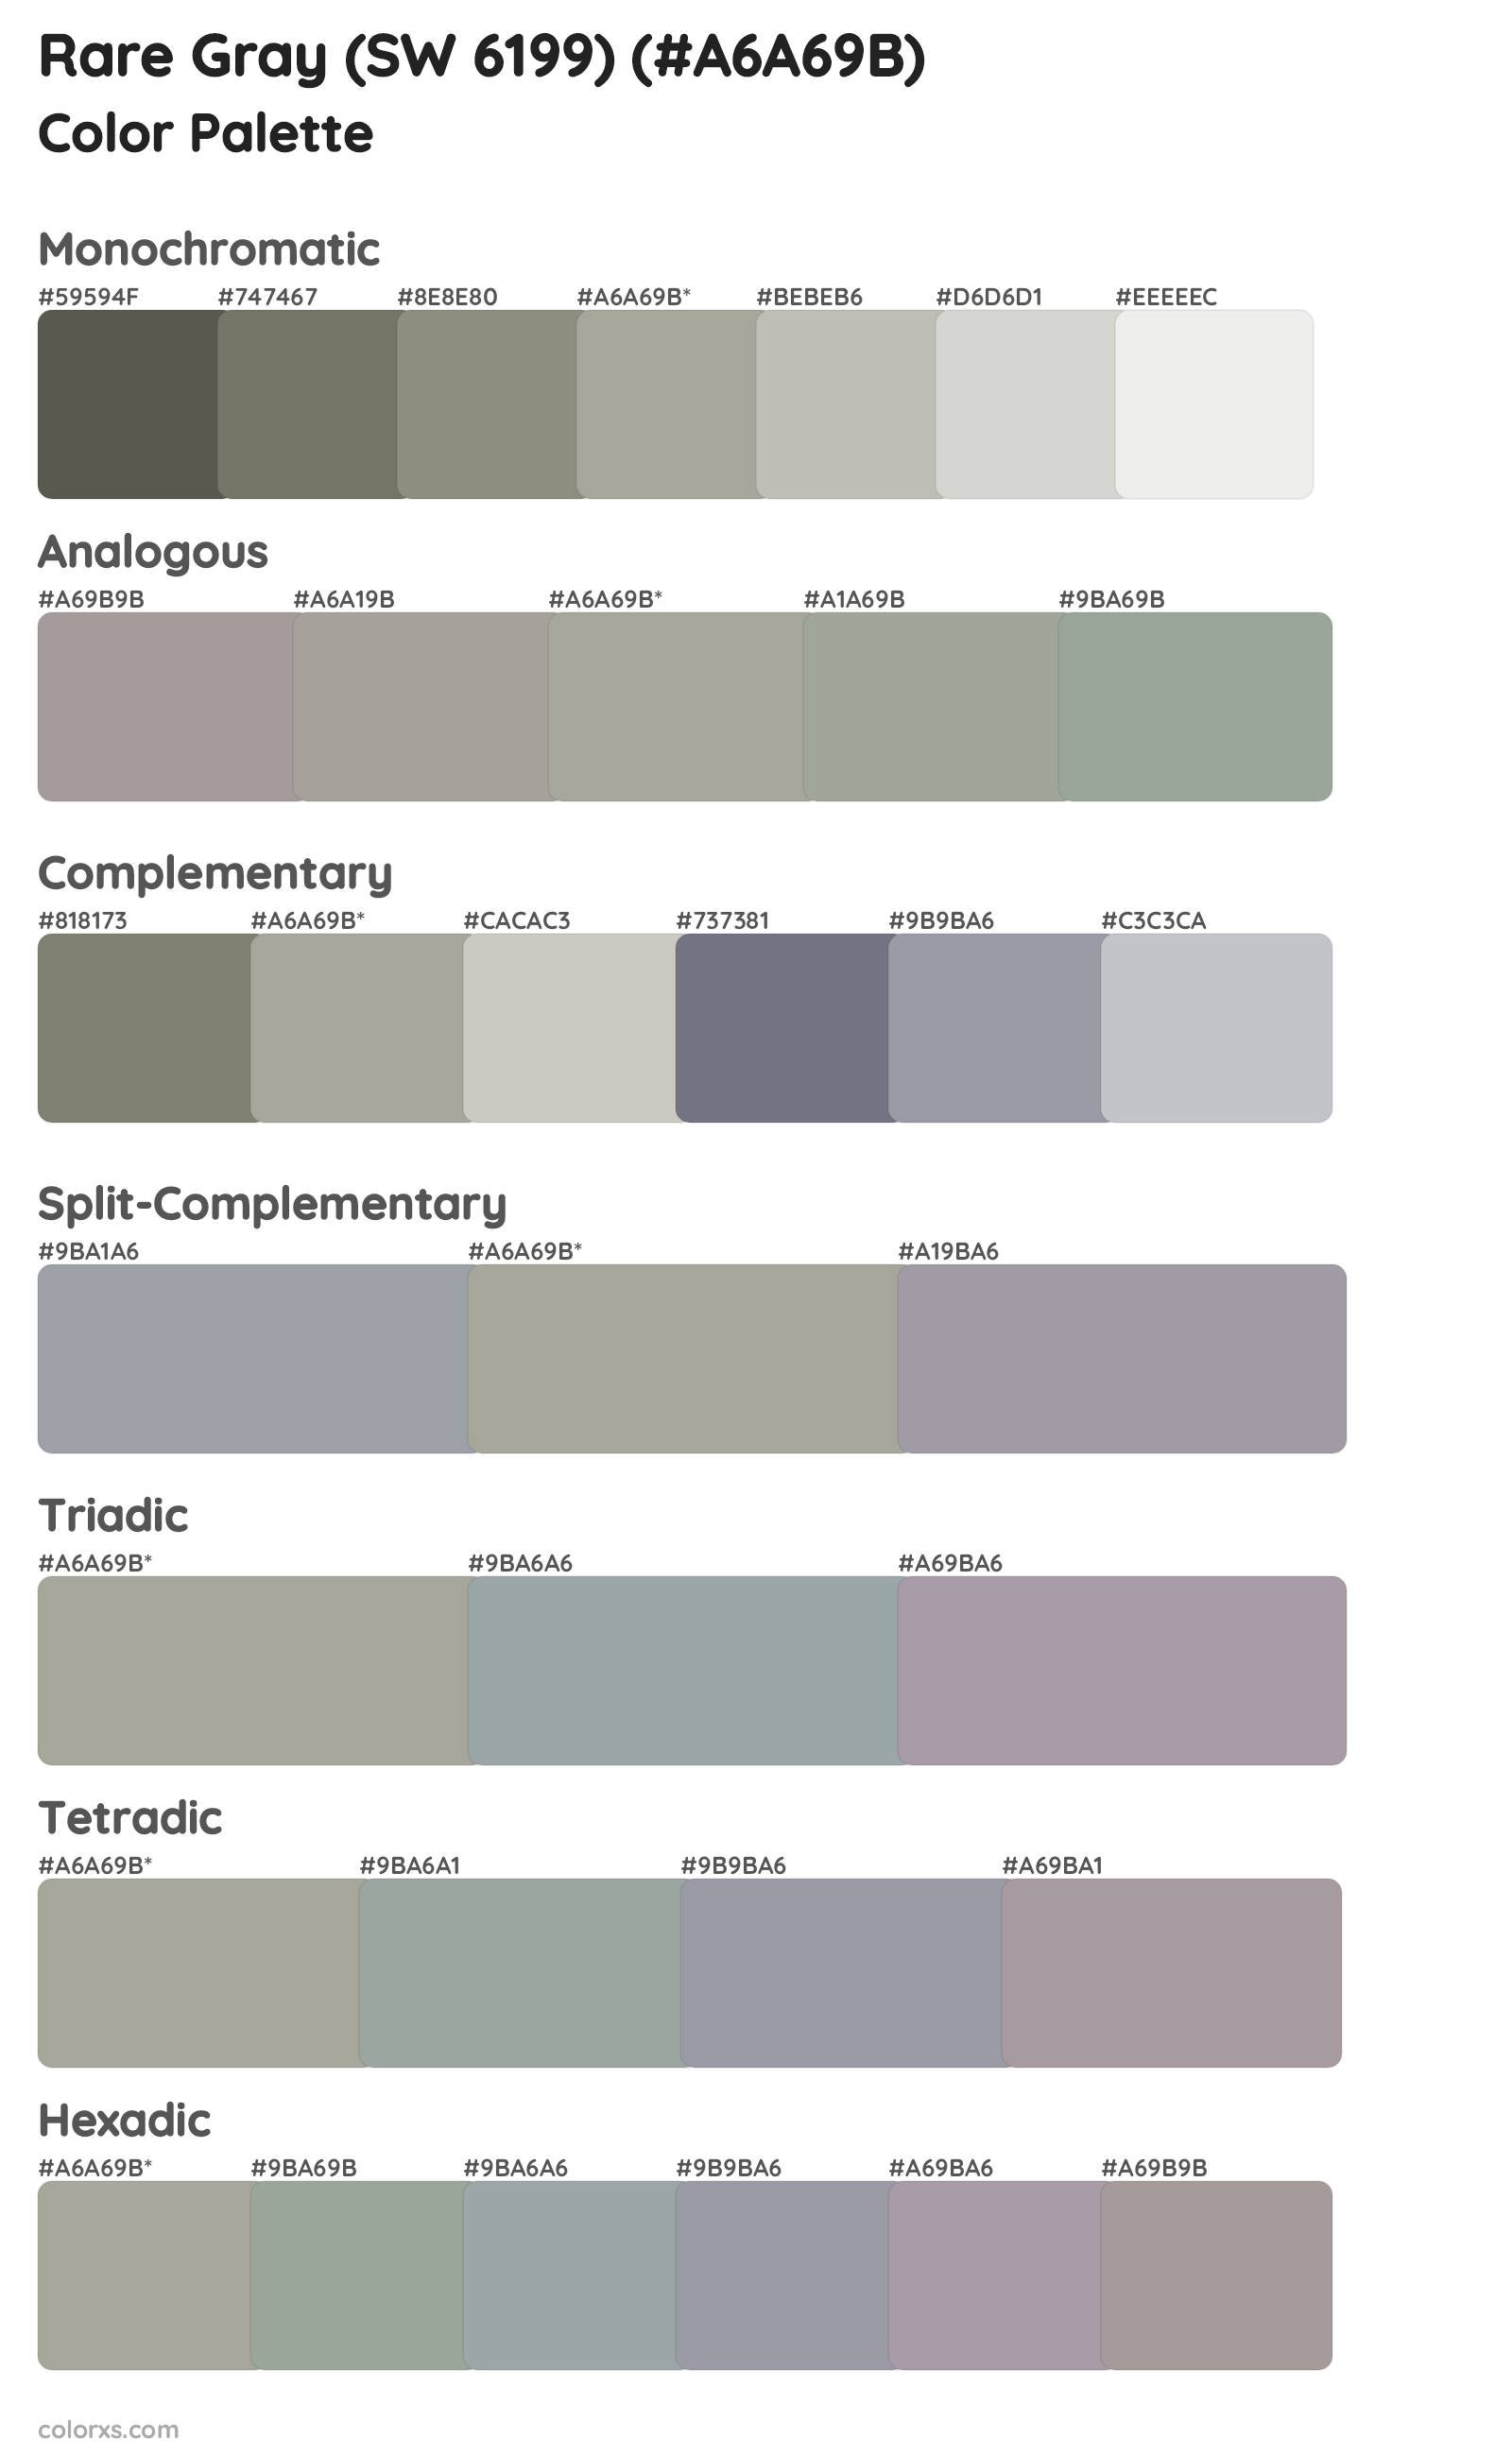 https://www.colorxs.com/img/color-palette/rare-gray-sw-6199.png